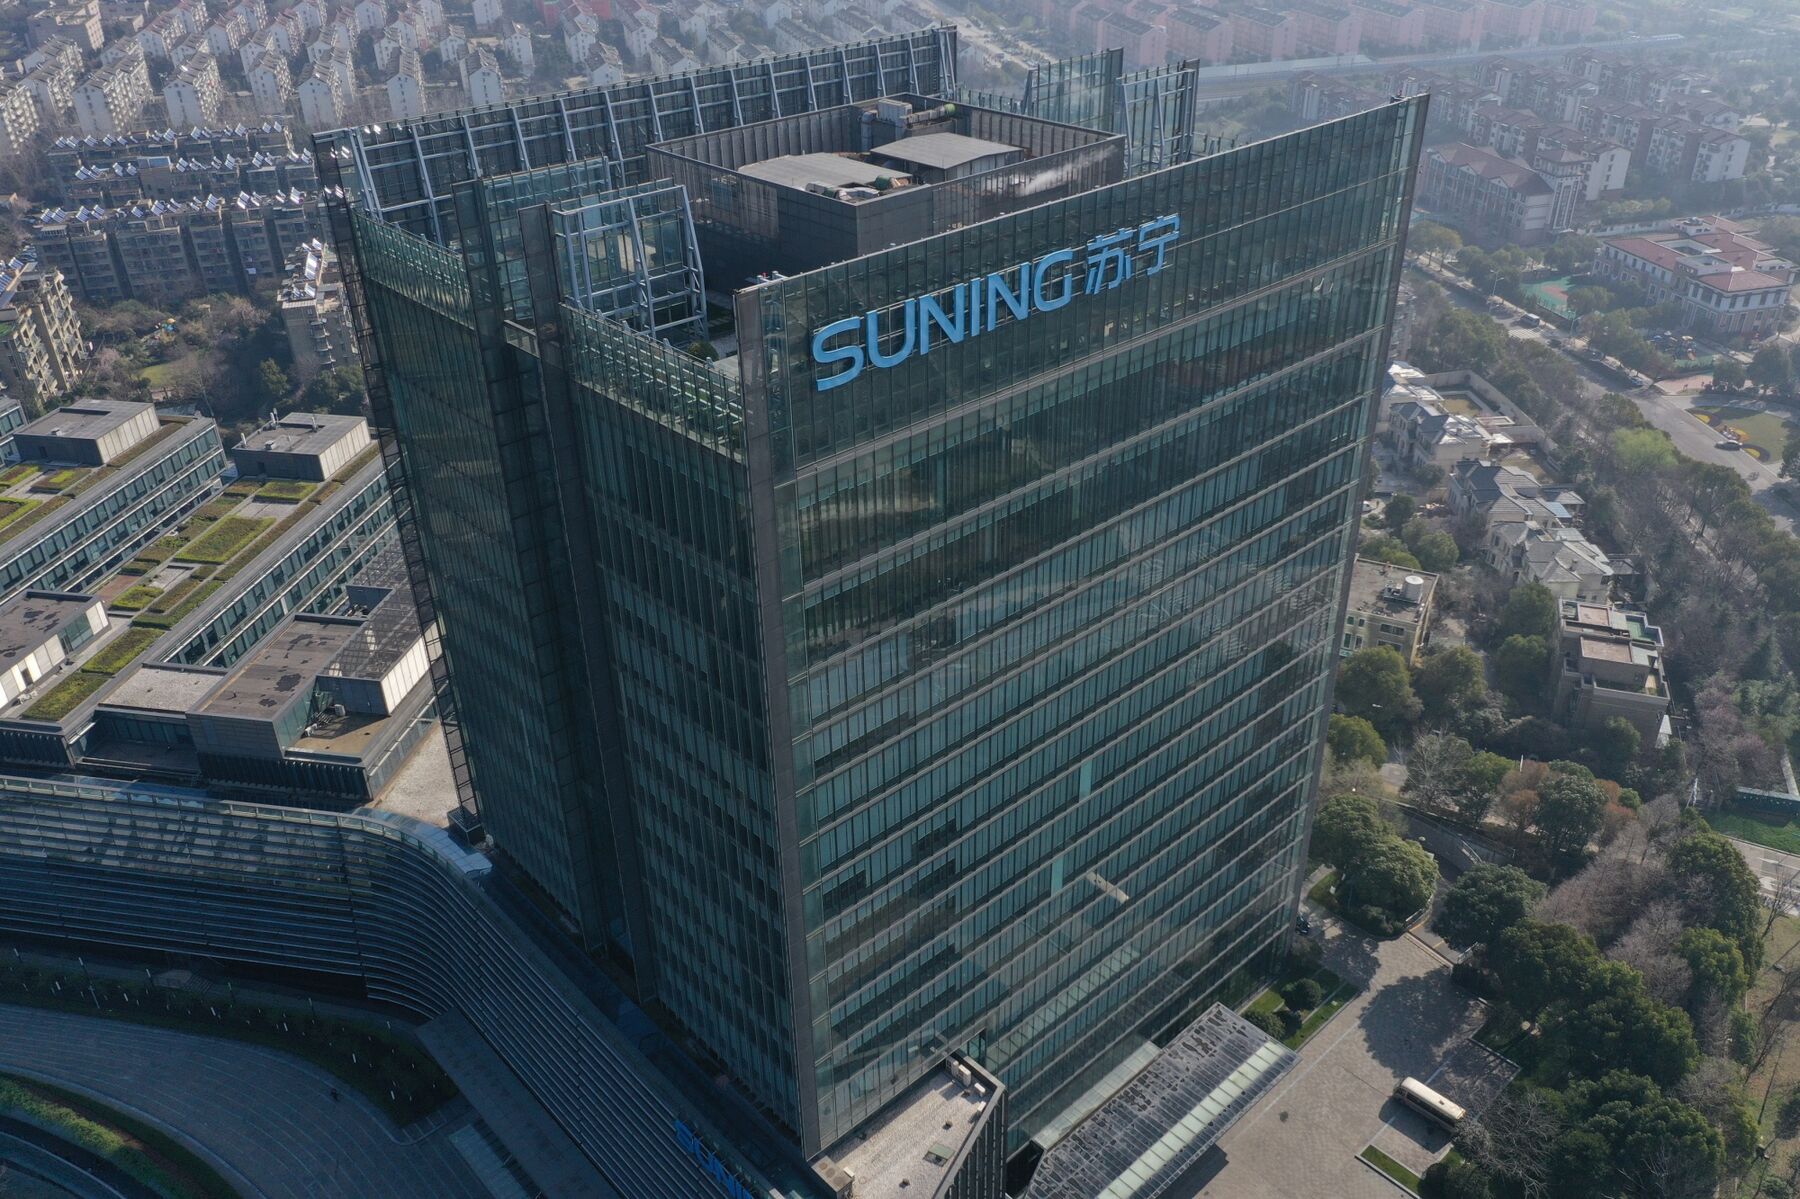 The Suning Group headquarters in Nanjing.